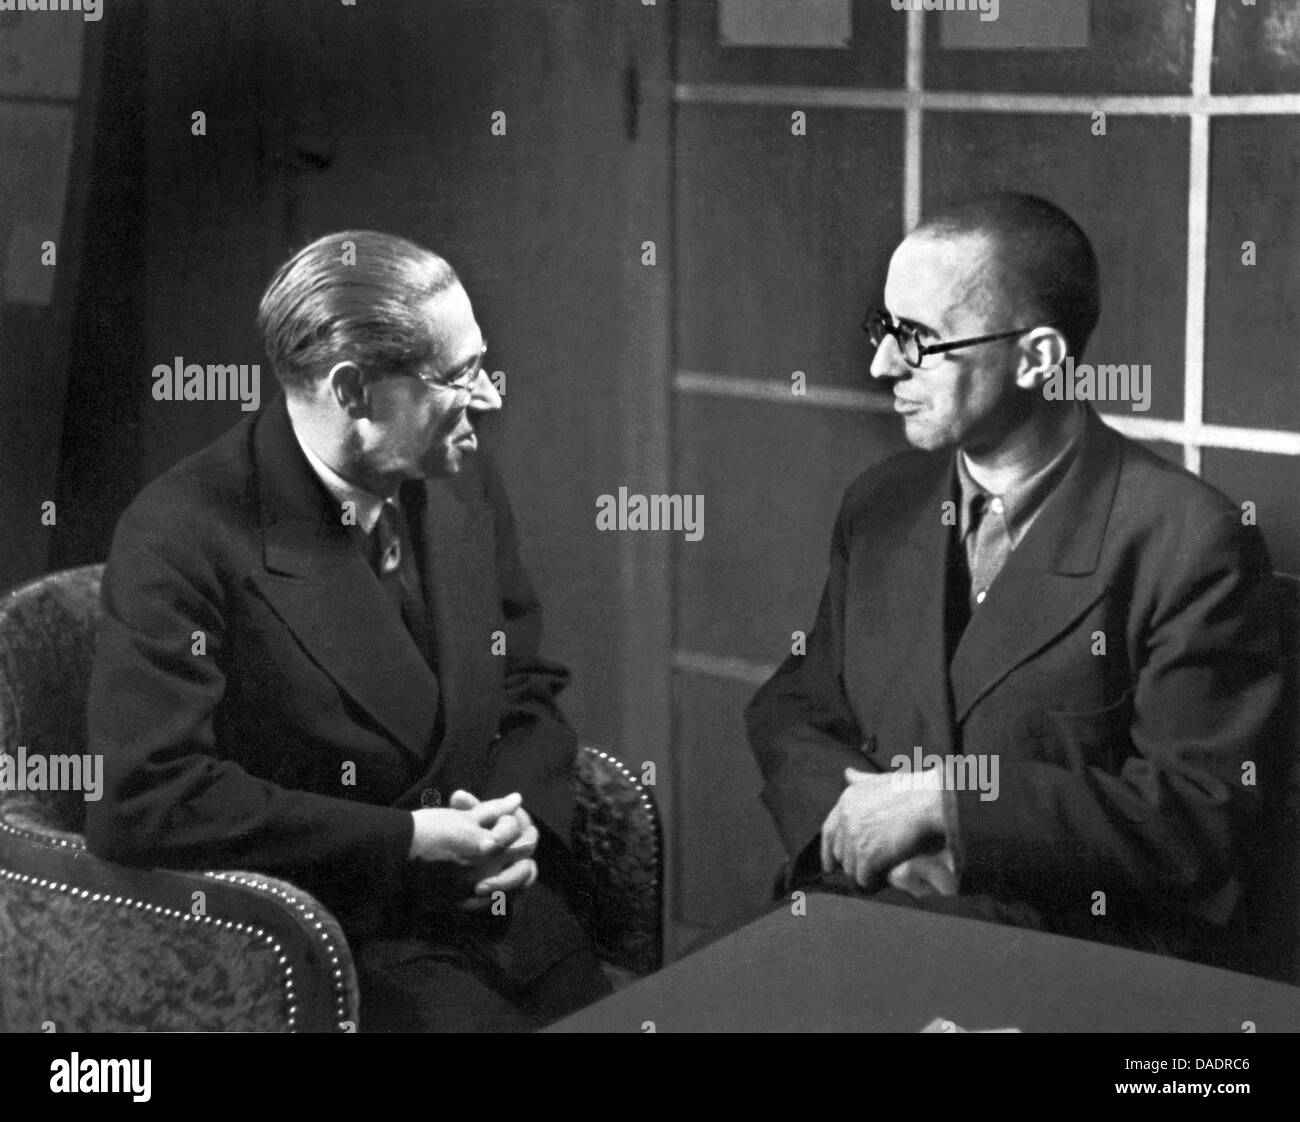 Authors Lion Feuchtwanger (l) and Bertolt Brecht in 1935 Portrait by photographer Fred Stein (1909-1967) who emigrated 1933 from Nazi Germany to France and finally to the USA. Stock Photo